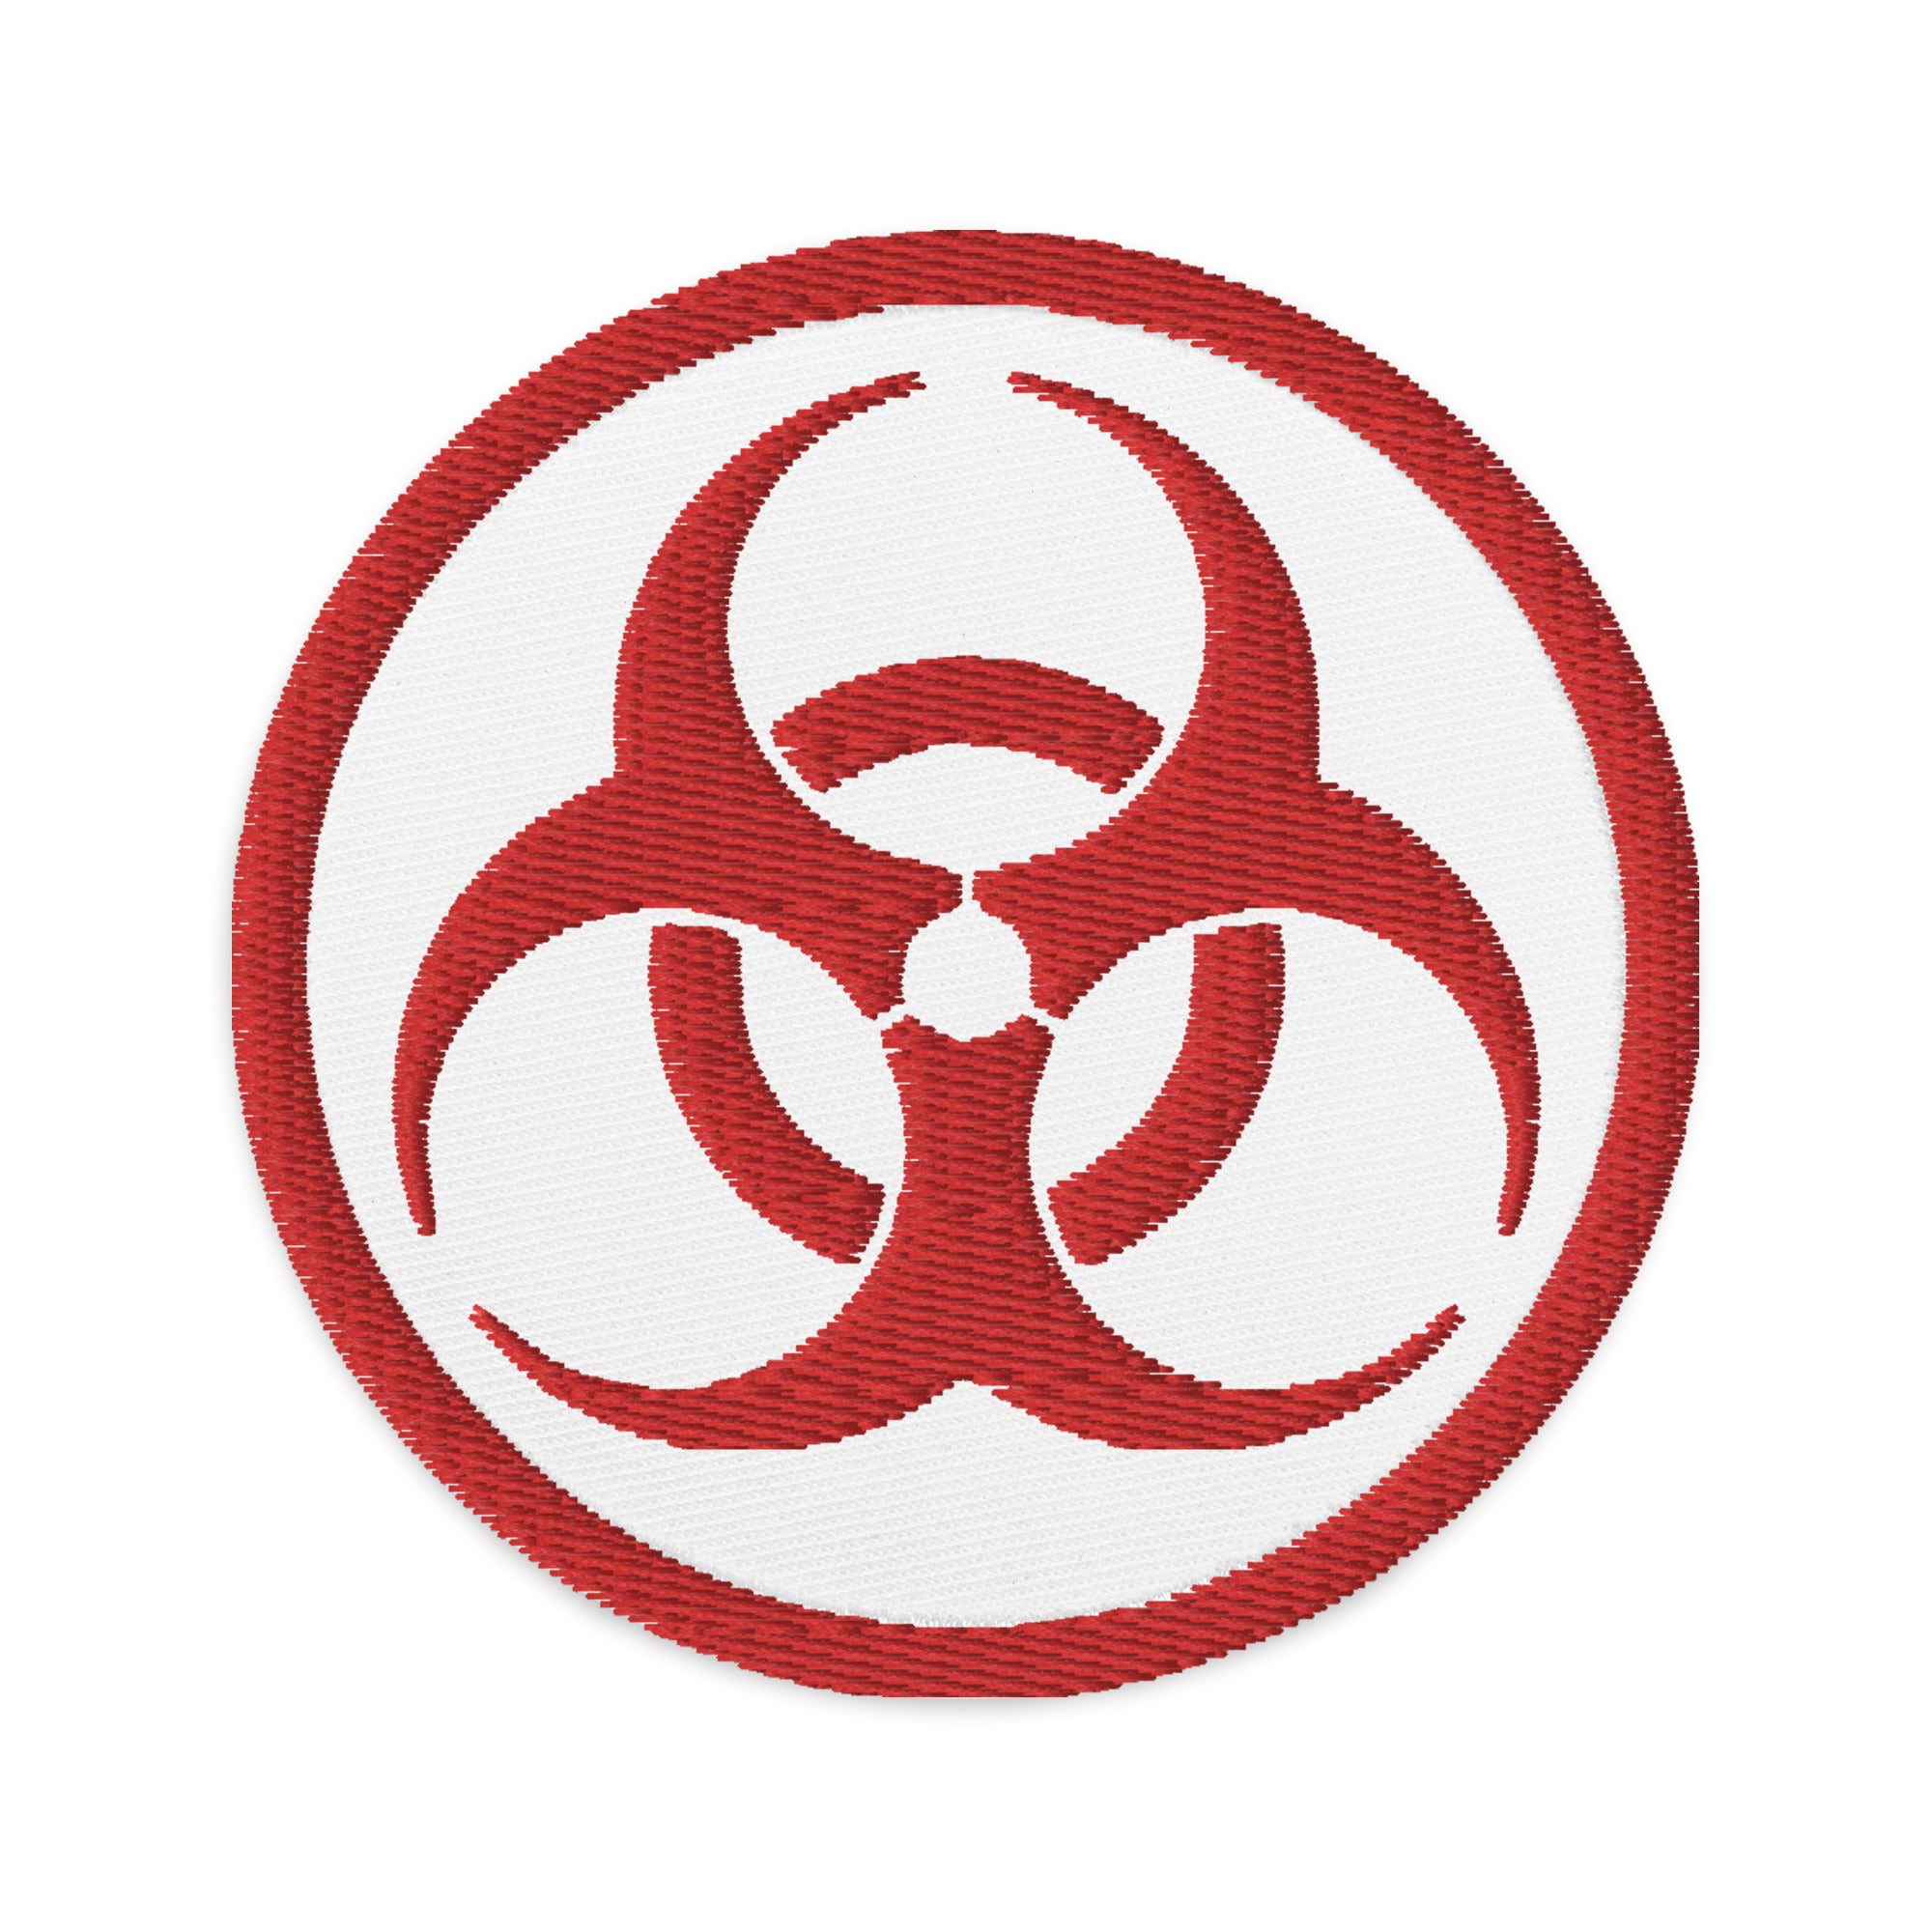 Red Thread Bio Hazard Symbol Warning Sign Embroidered Patch Zombie Apocalypse - Edge of Life Designs